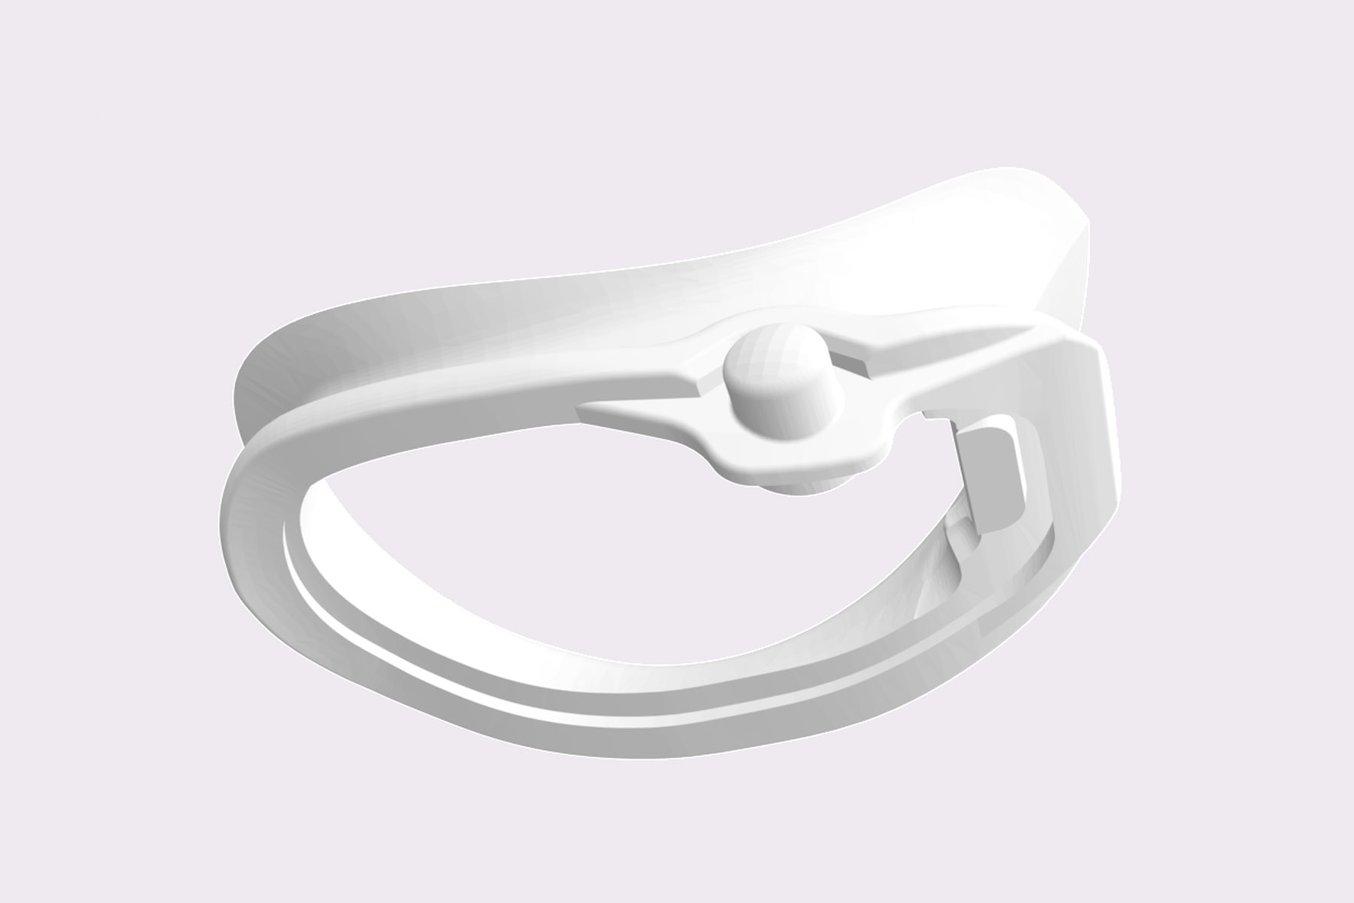 CAD file of a goggle gasket with an integrated button.